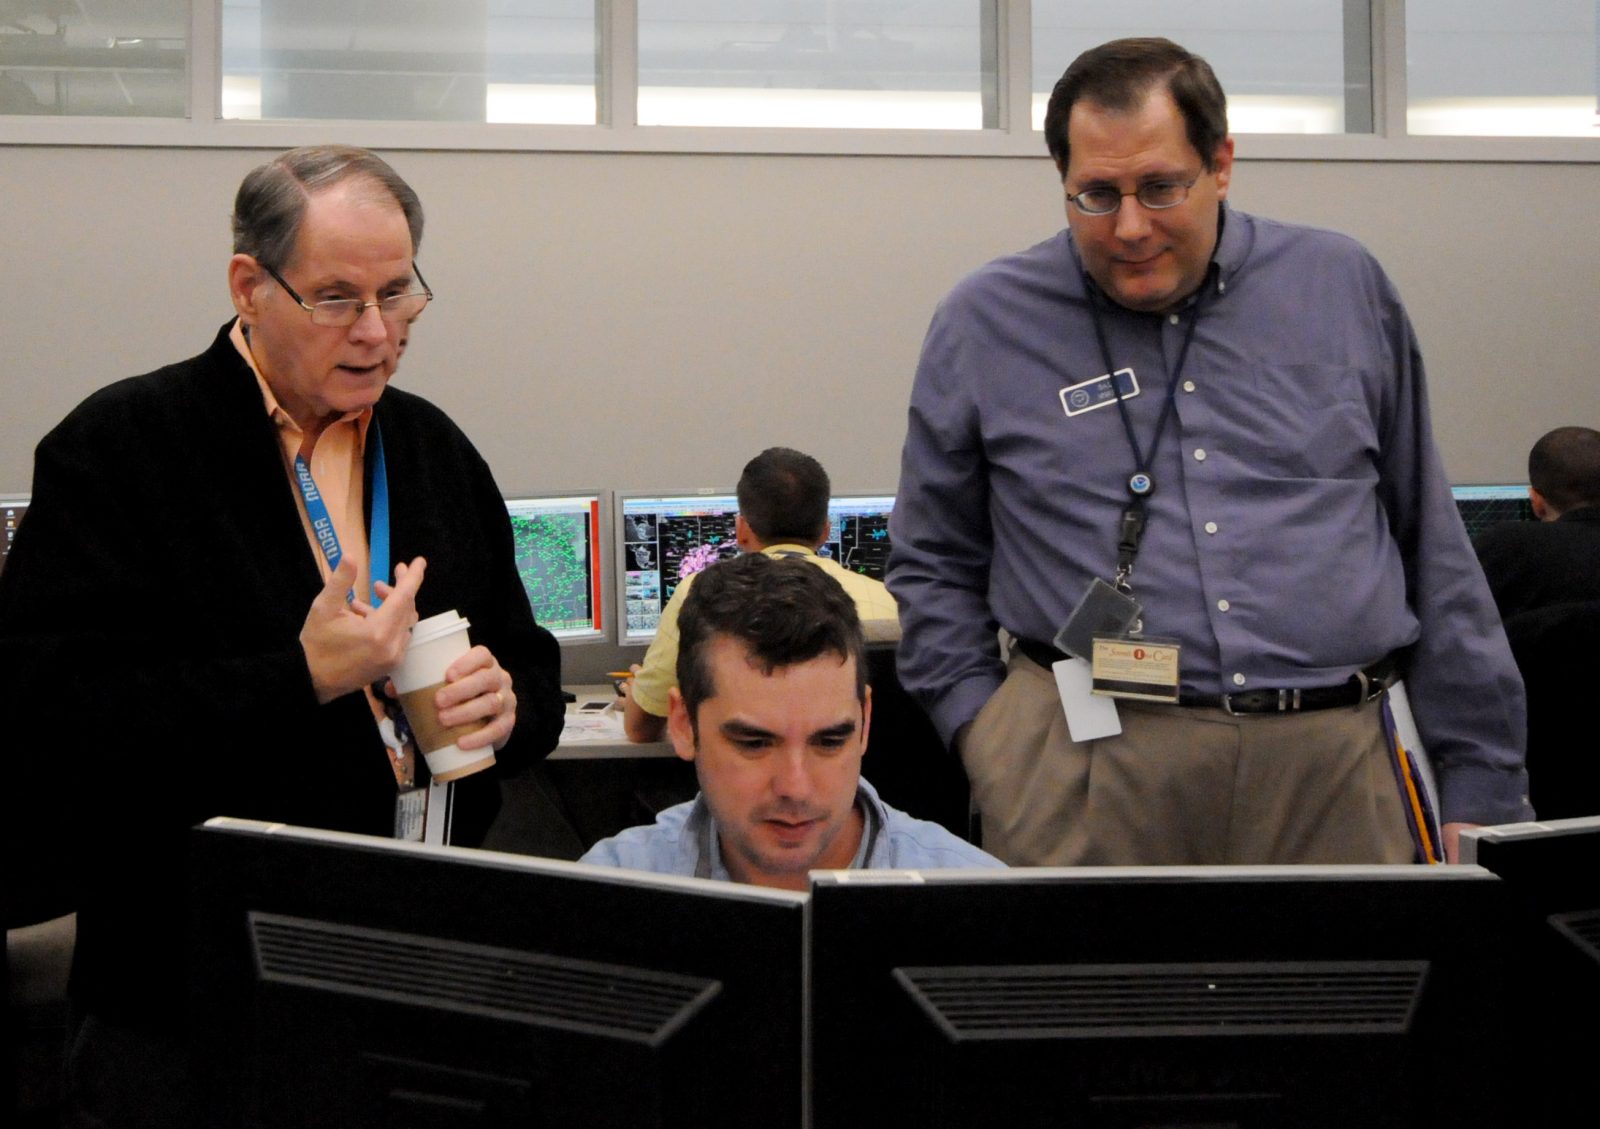 Former CIMMS Research Associate and longtime radar expert Les Lemon and current CIMMS Researcher Dale Morris instructing a forecaster in the NWS WDTD lab in 2013. (Photo provided).